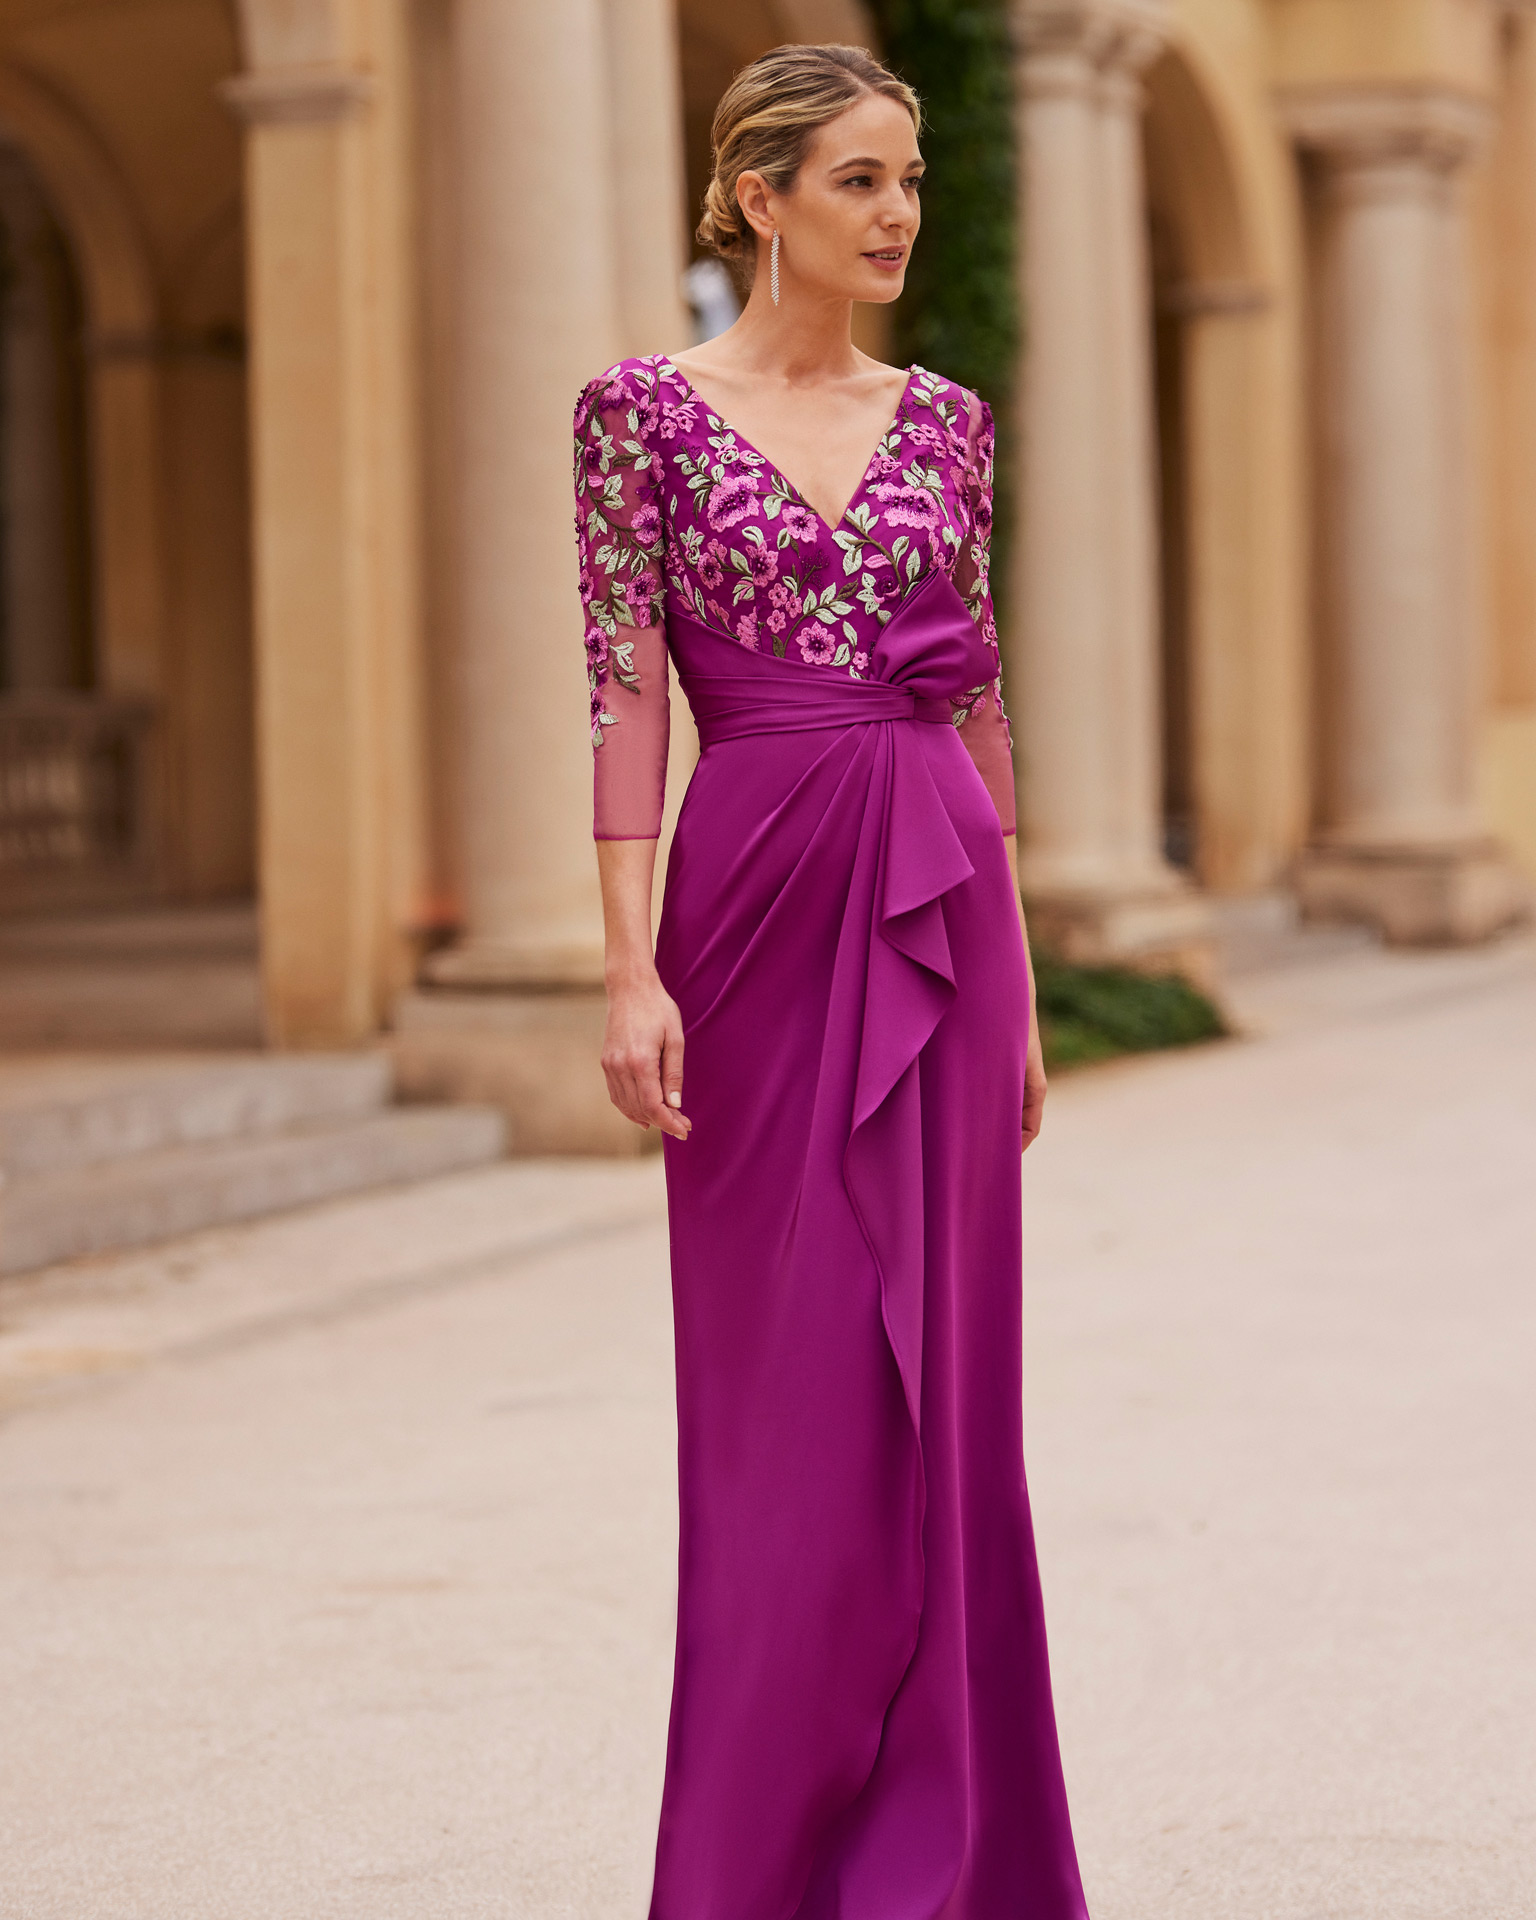 Flowing long evening dress. Crafted with sateen crêpe and beadwork lace. With V-neckline and three-quarter sleeve. Couture Club look. MARFIL_BARCELONA.